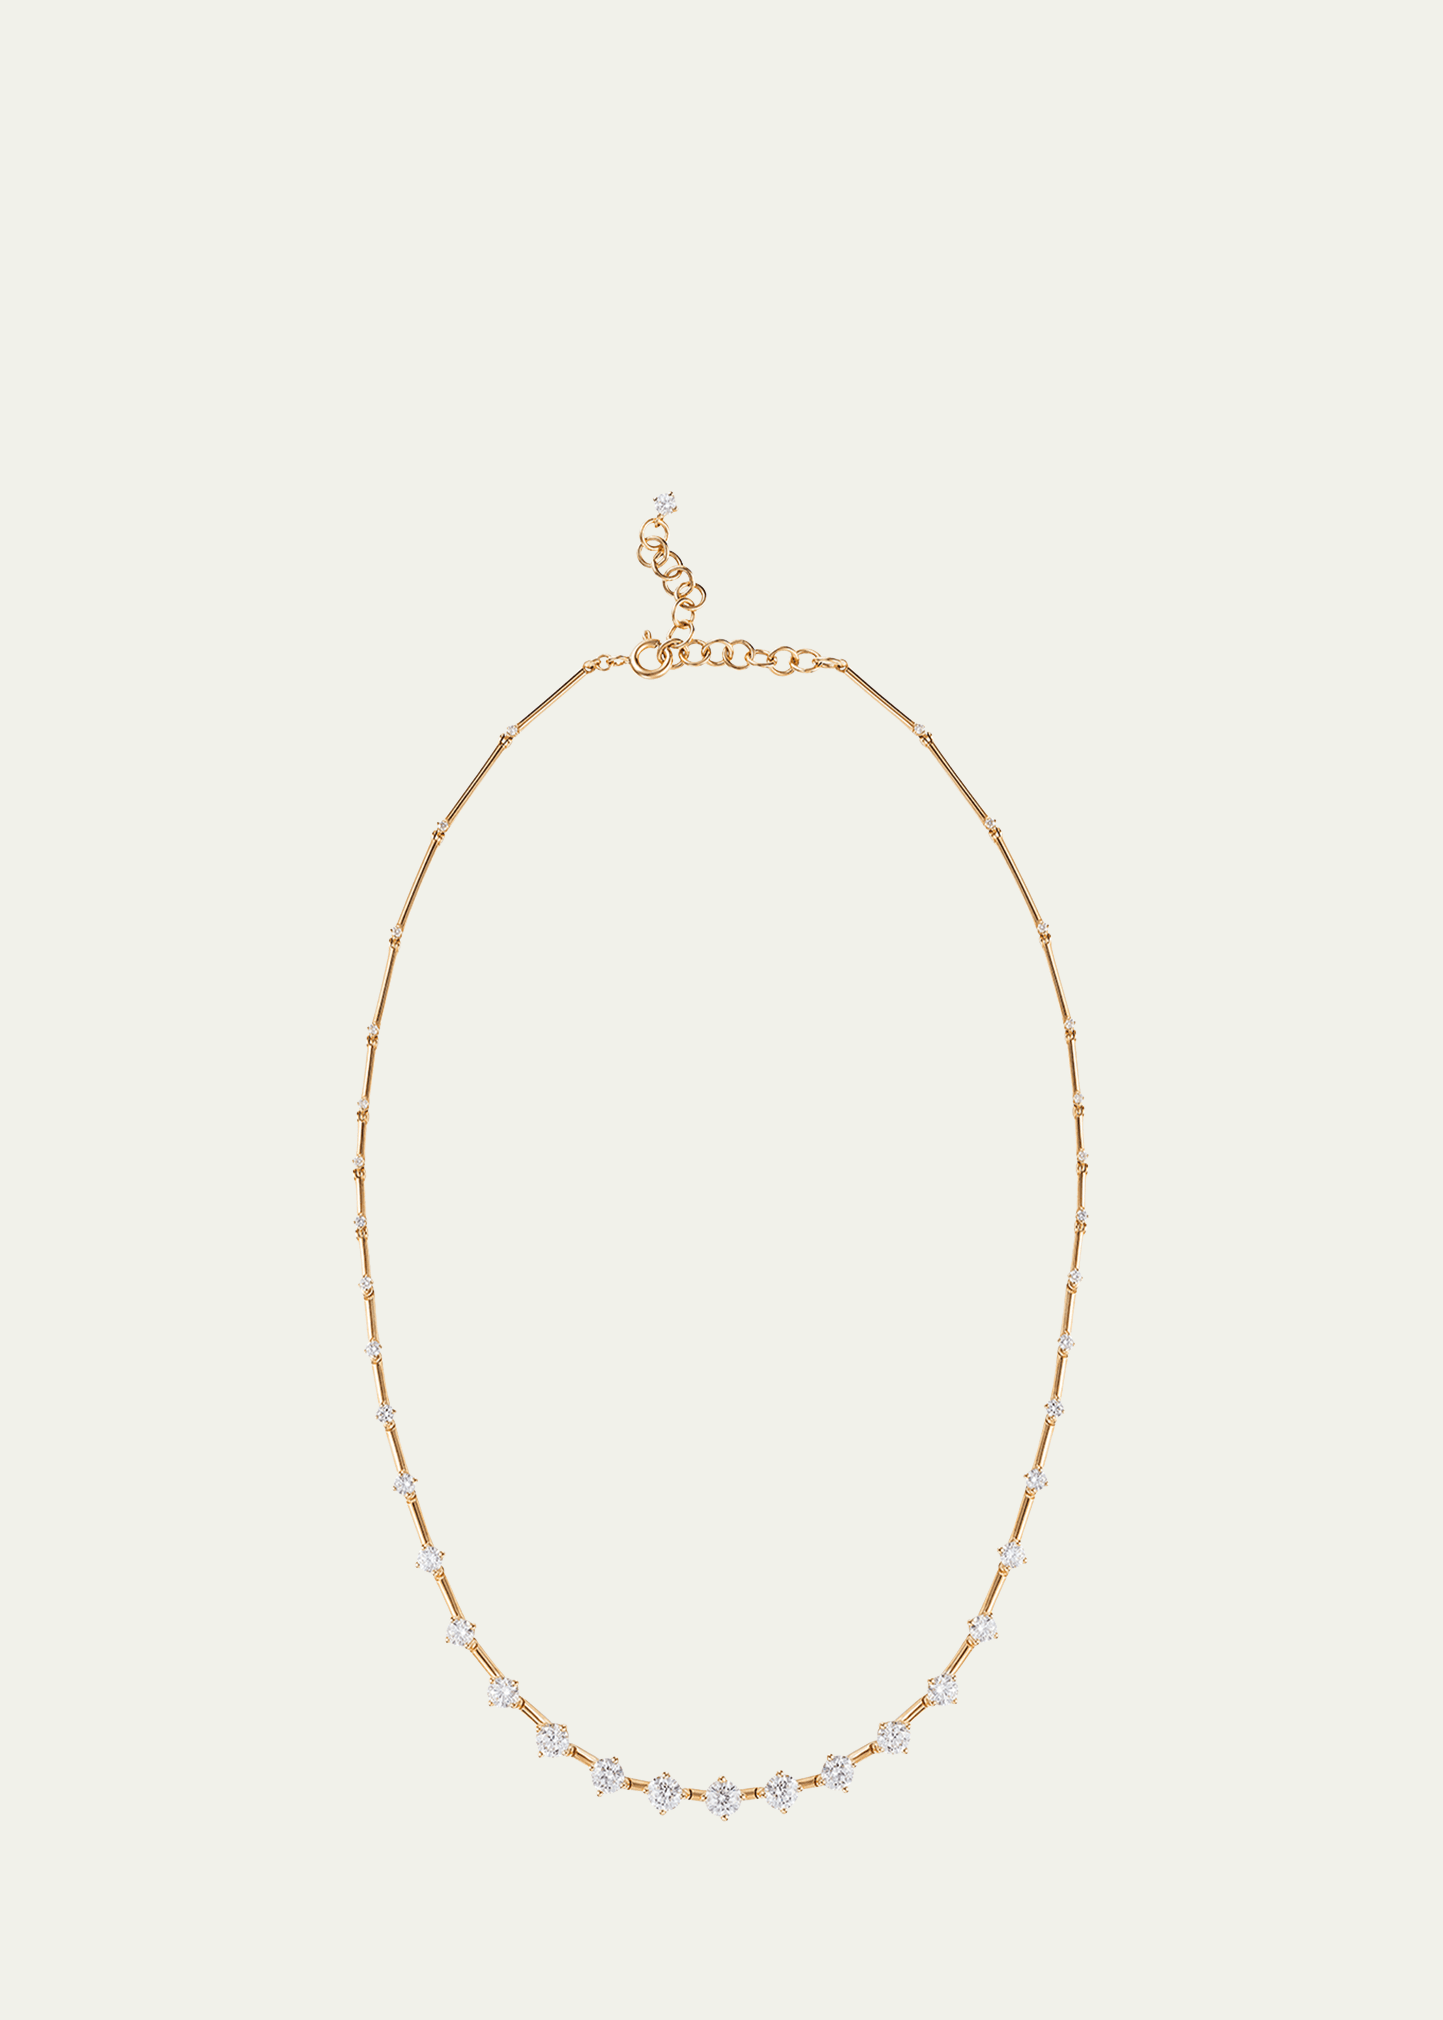 Fernando Jorge Sequence Necklace in Yellow Gold and Diamonds